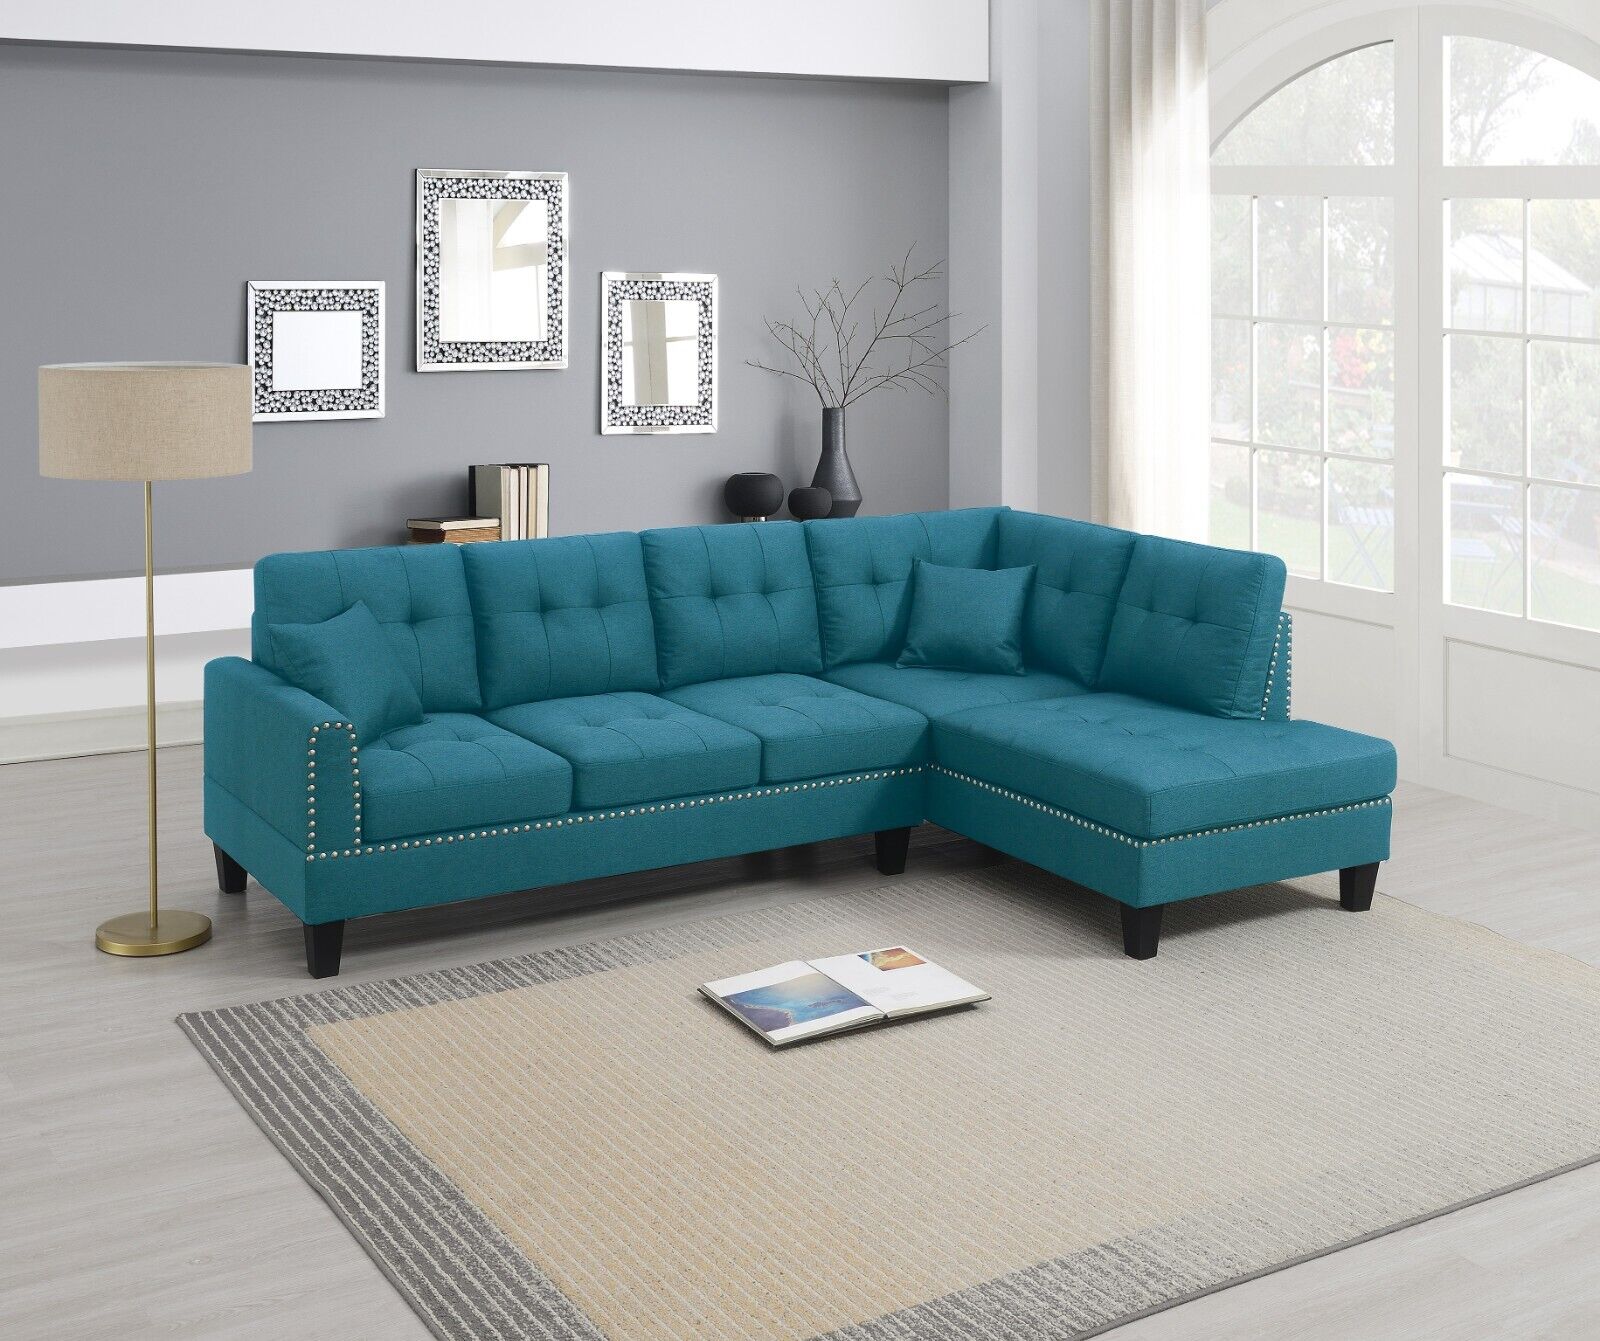 Esofastore Living Room Furniture Azure Fabric Tufted Cushion Couch 2pcs Sectional Set RAF Chaise LAF Sofa 